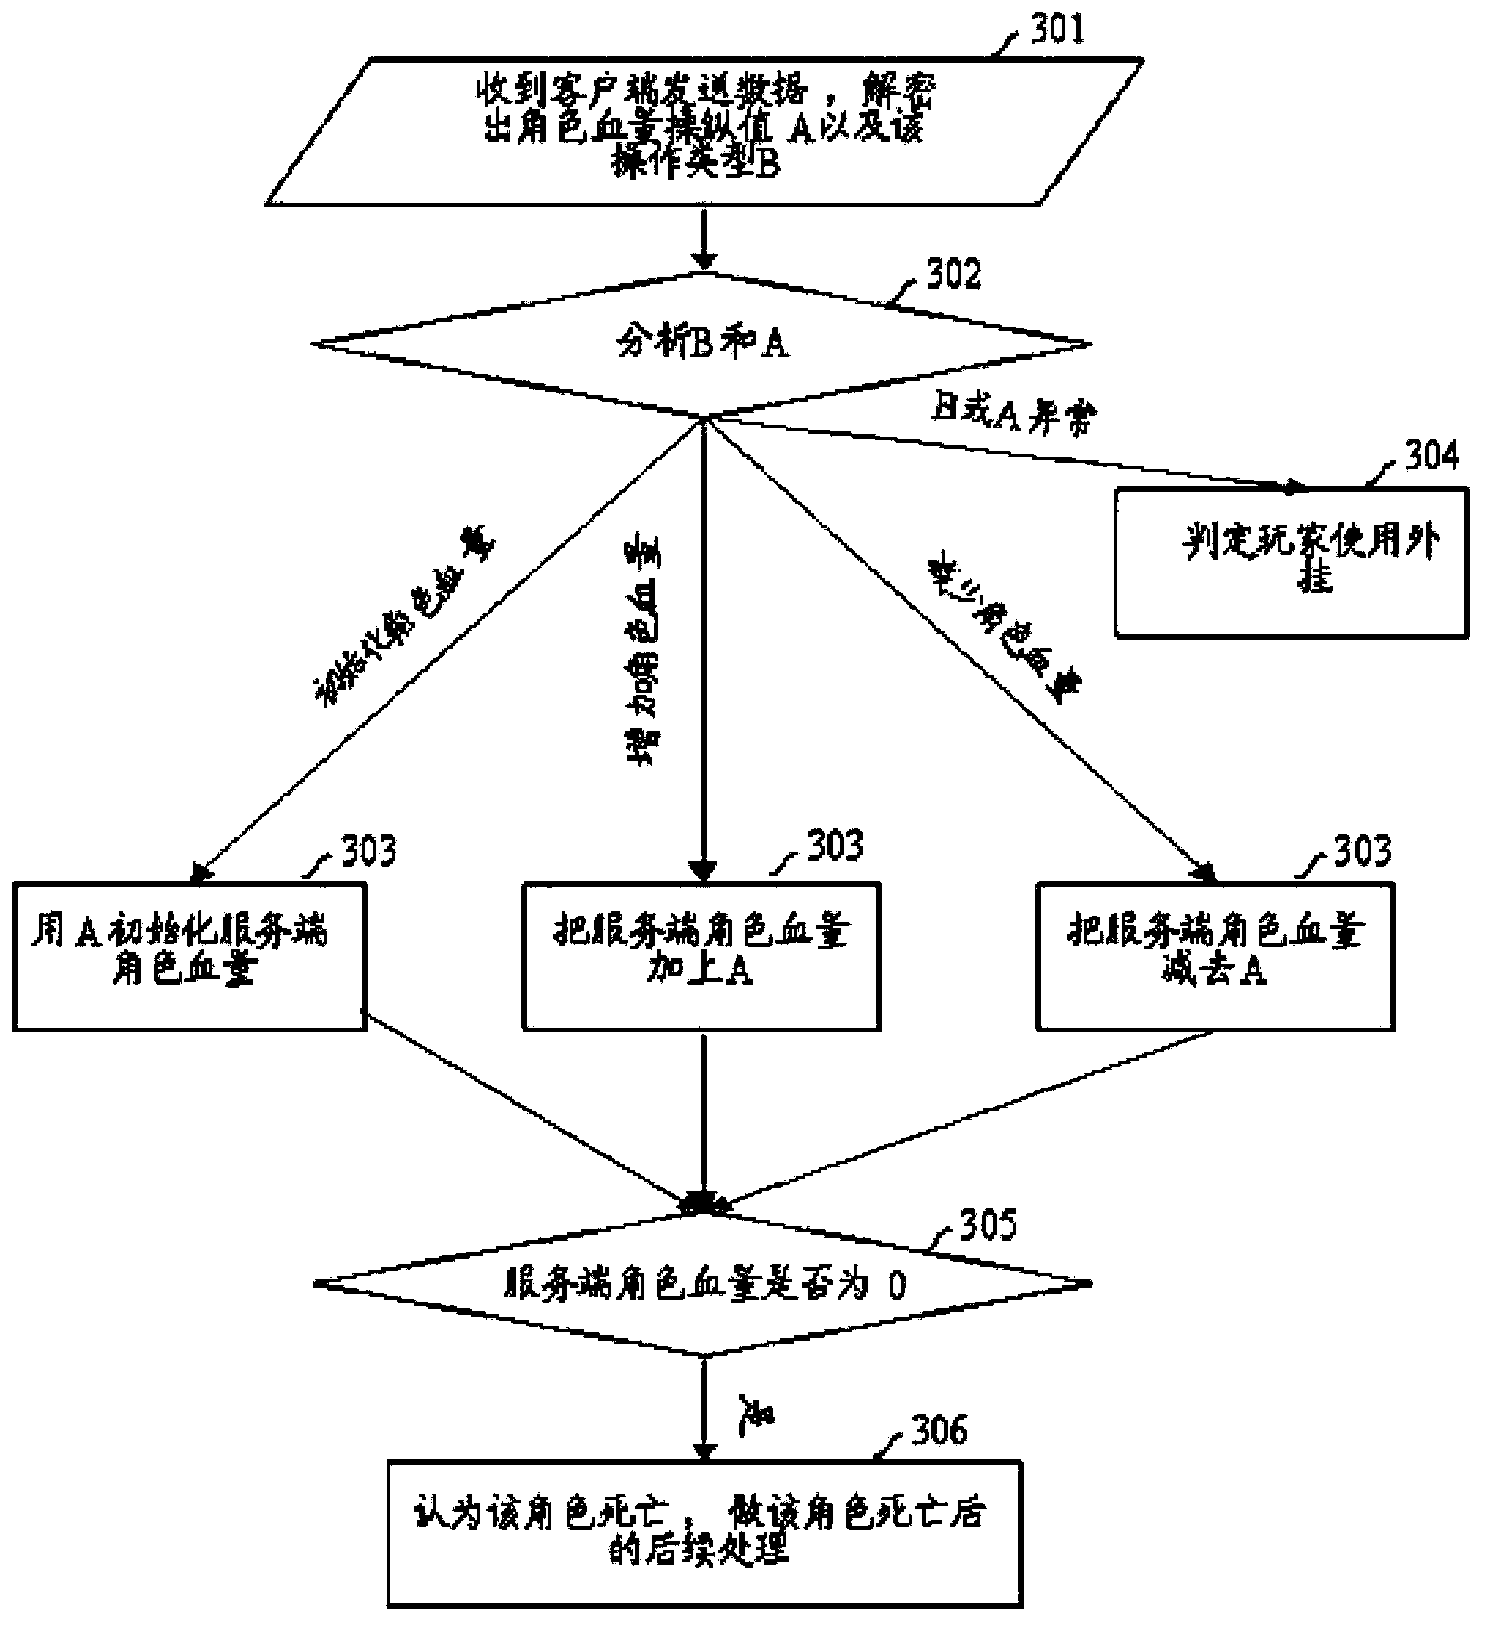 Simulator-type plug-in identification method and system for networking game